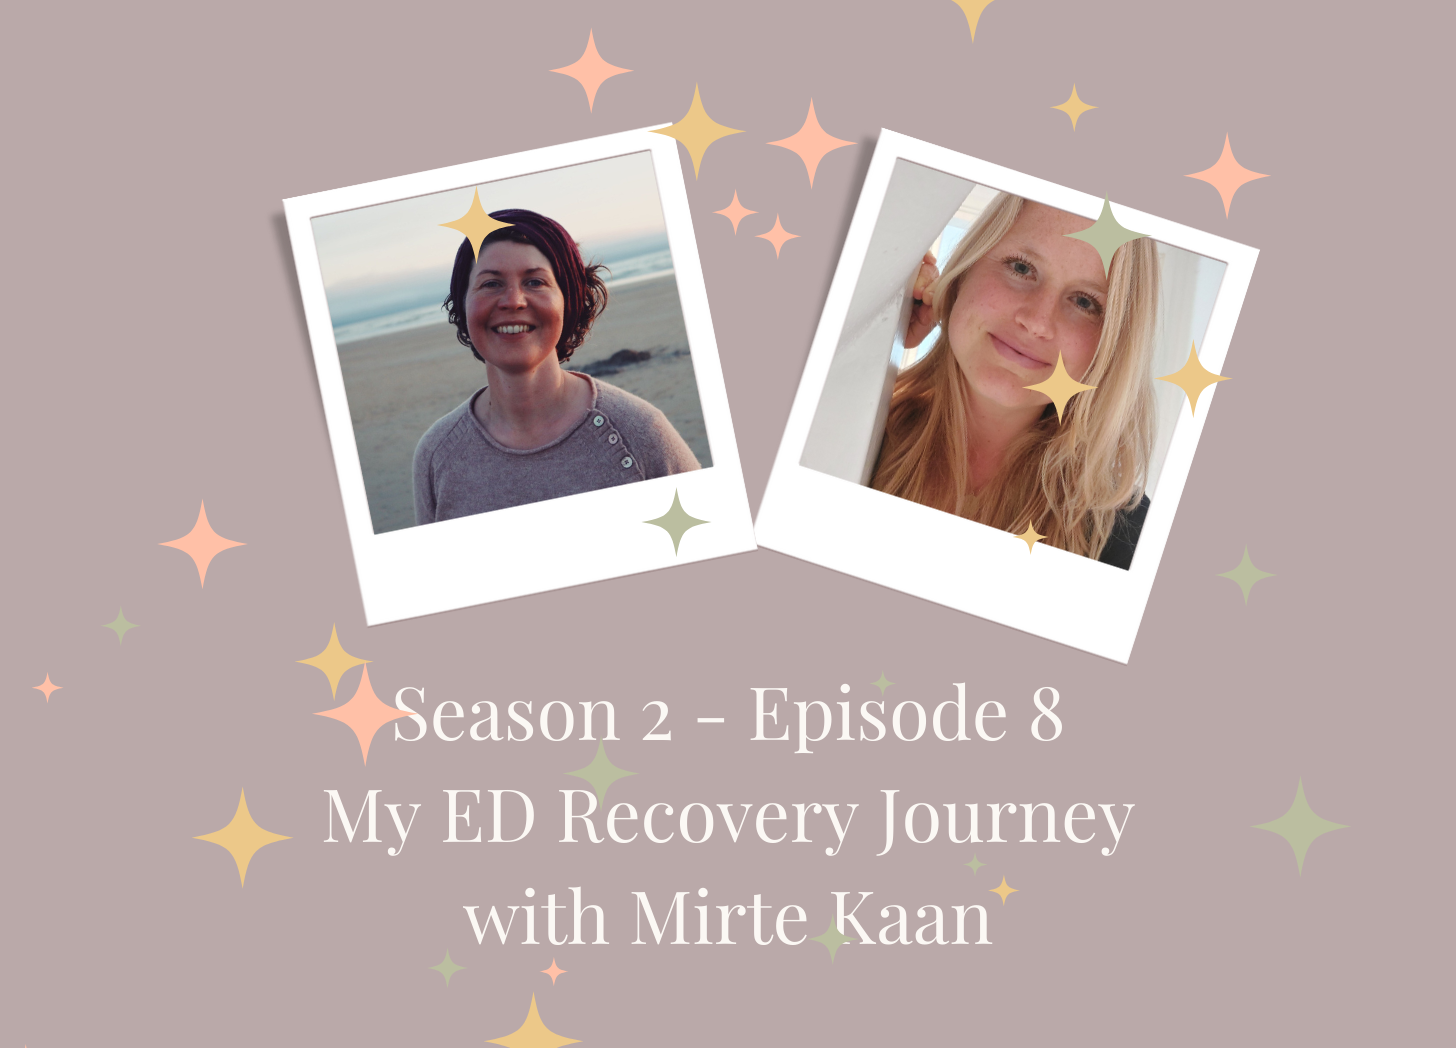 SE2 – Ep 8: My Eating Disorder Recovery Journey with Mirte KaanSE2 – Ep 8: